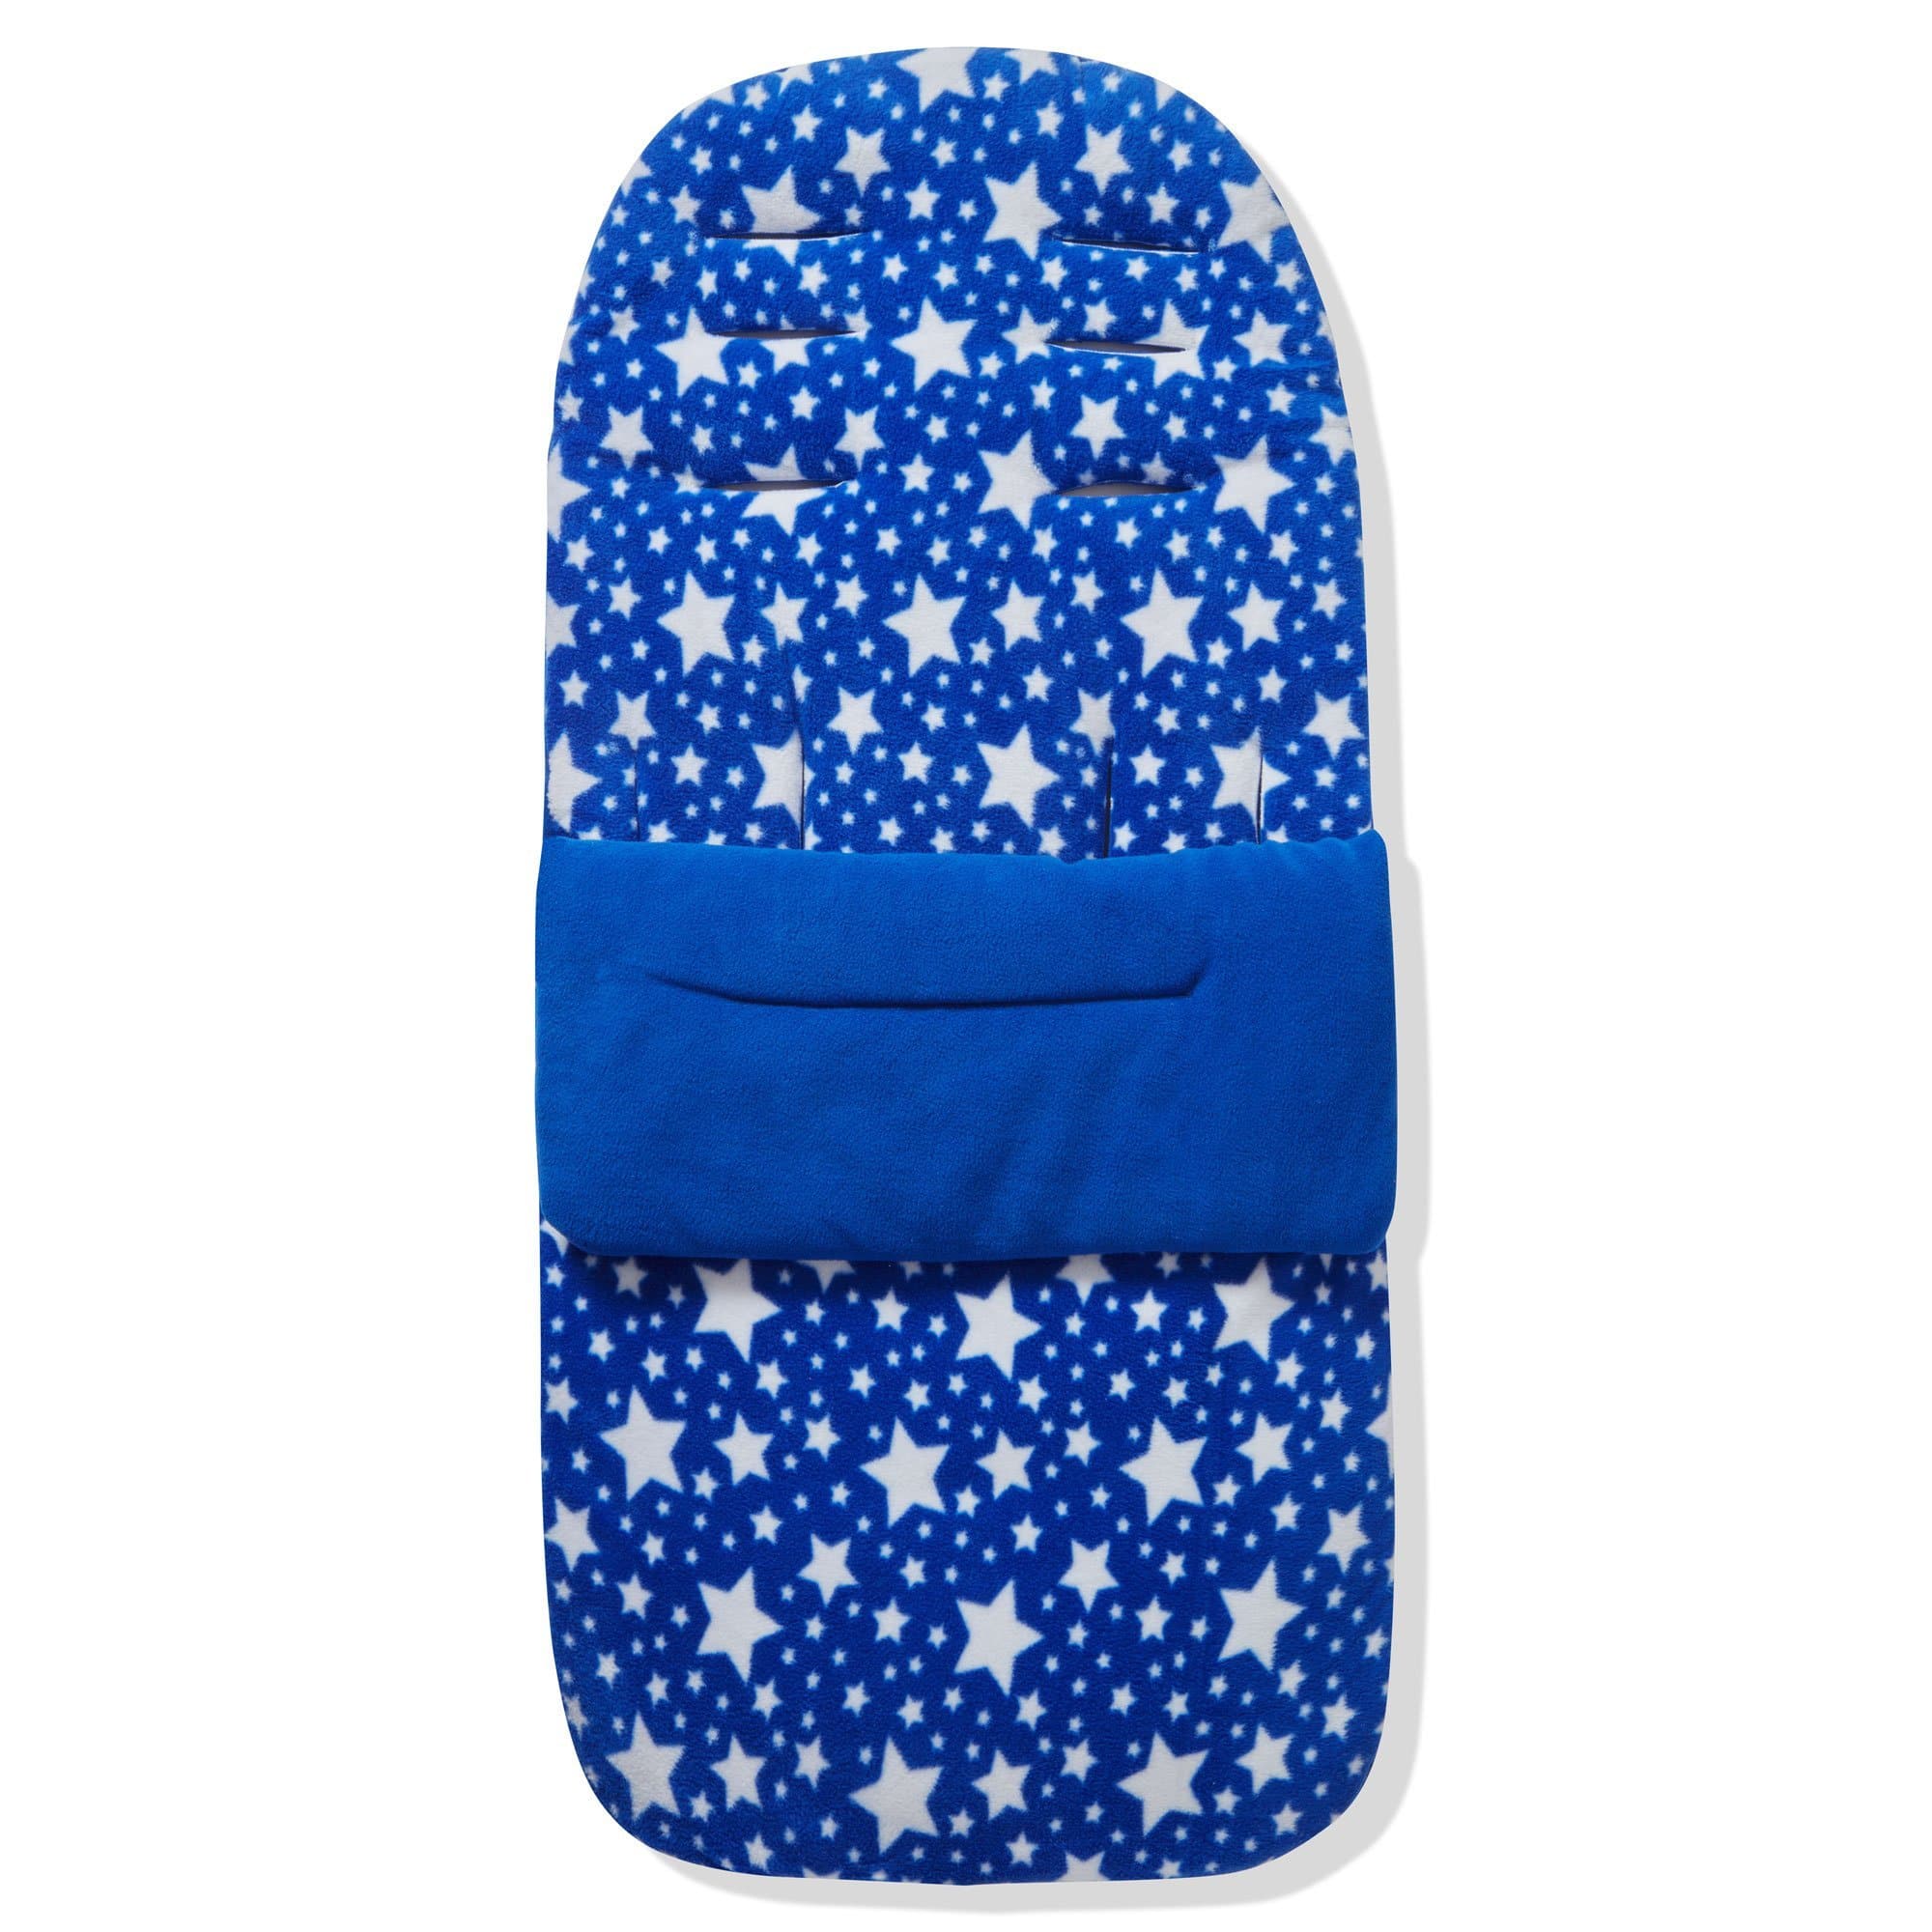 Fleece Footmuff / Cosy Toes Compatible with Nania - Blue Star / Fits All Models | For Your Little One